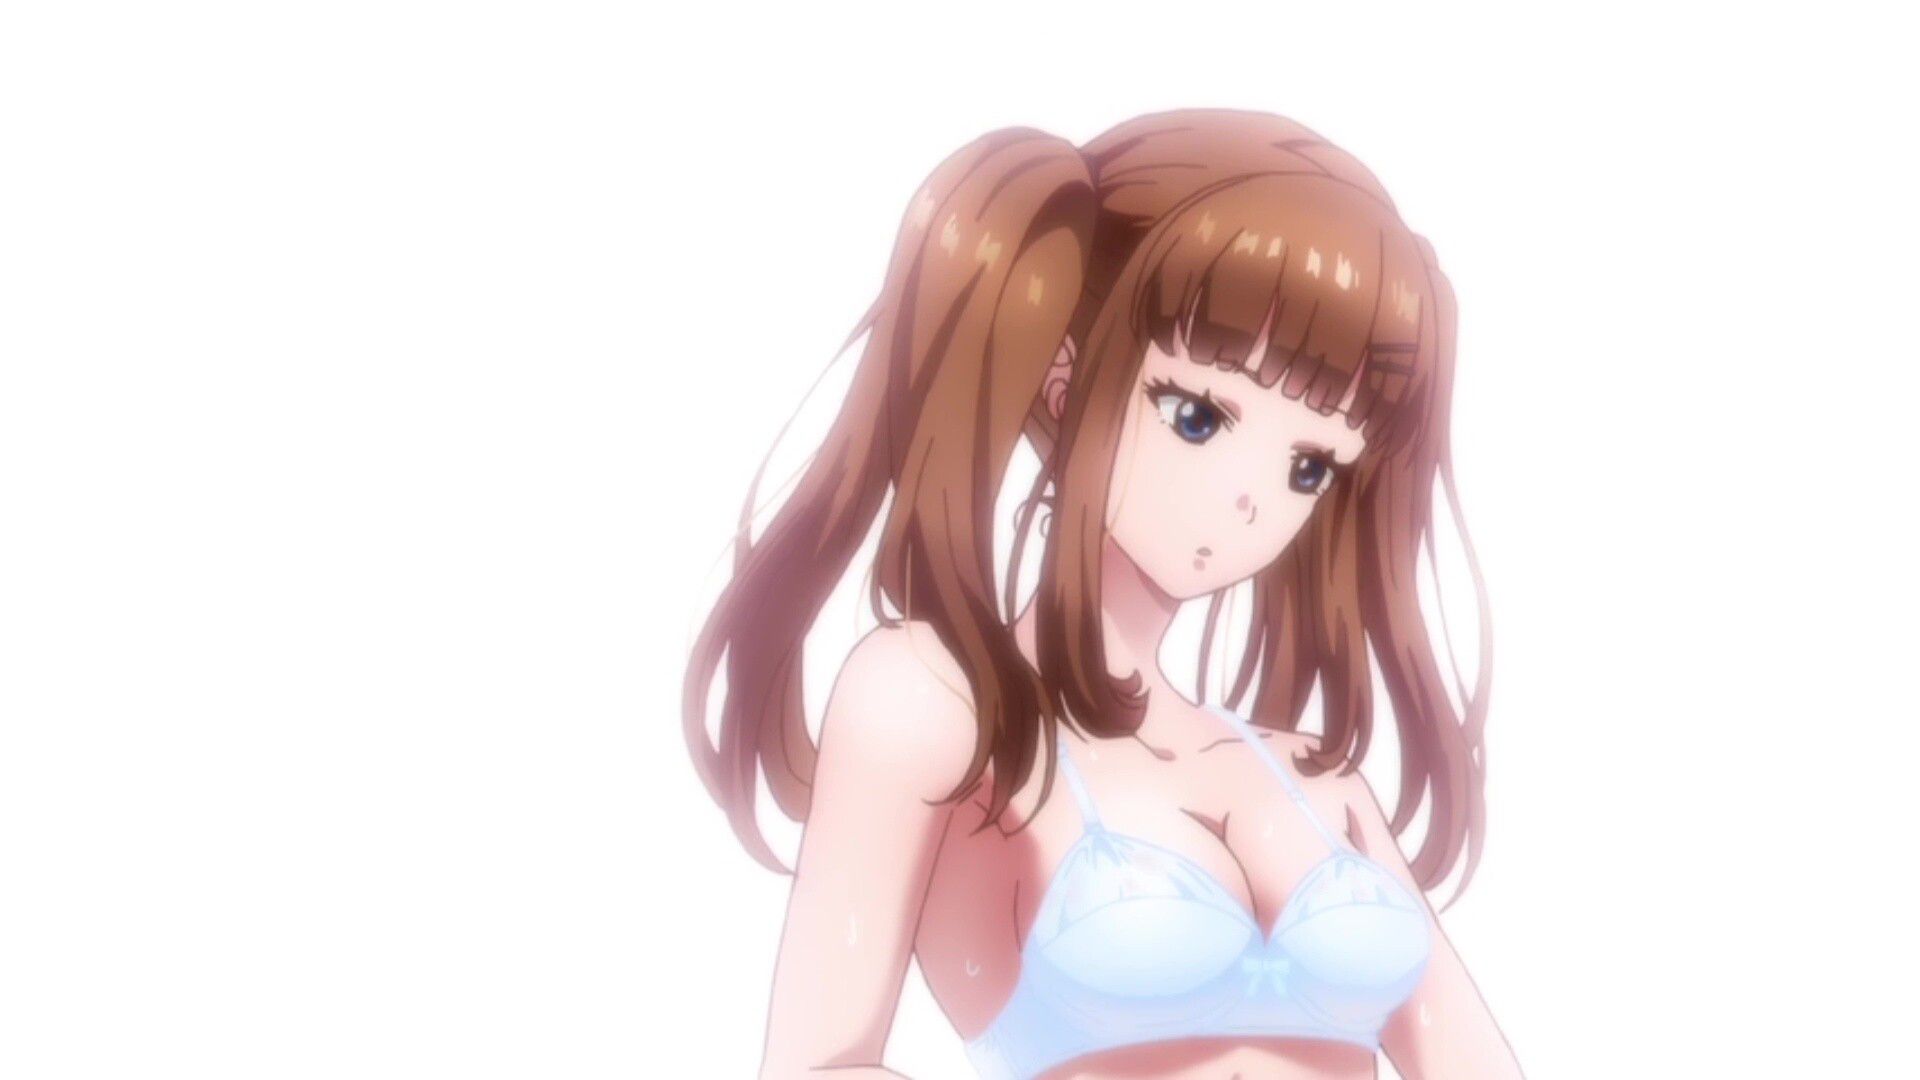 In episode 9 of the anime "Tomodachi Game", an erotic scene in which pants and bra are transparent in the depiction of underwear that is too erotic 19